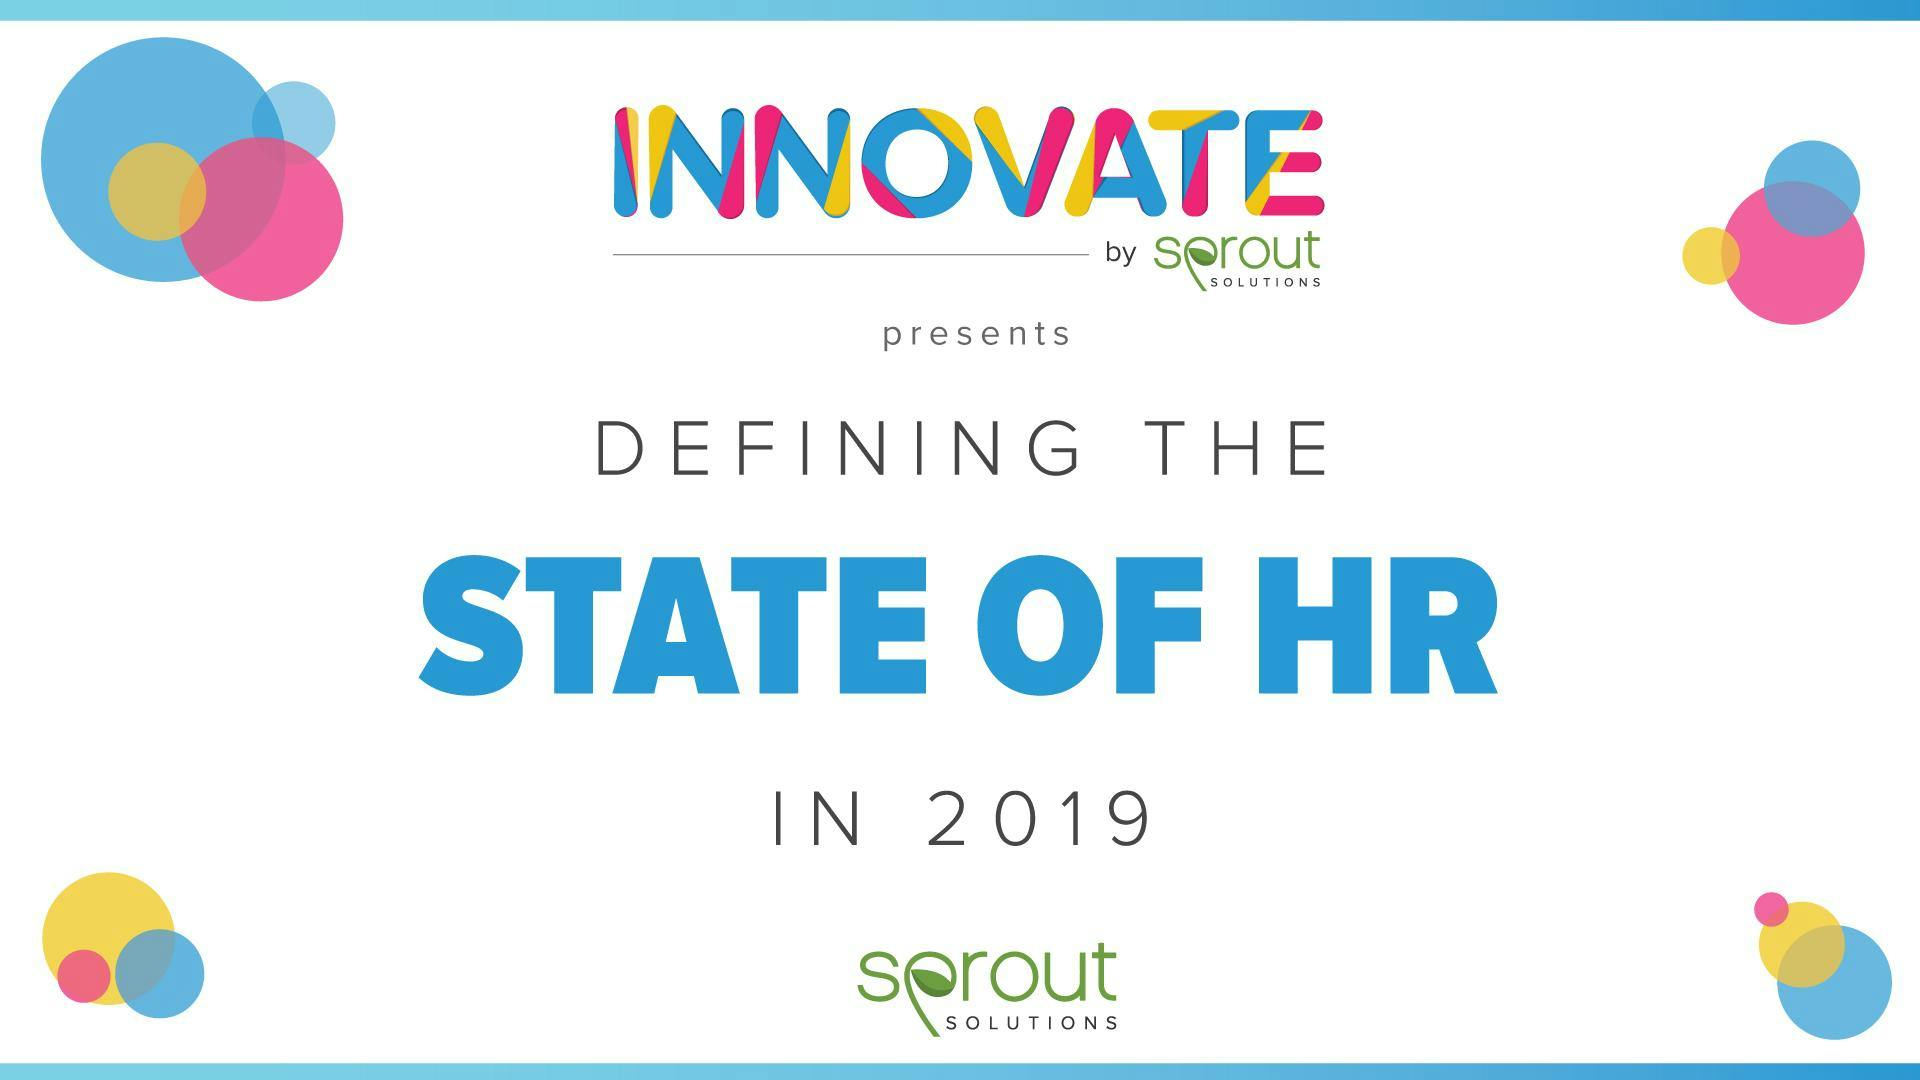 Innovate: Defining the State of HR 2019